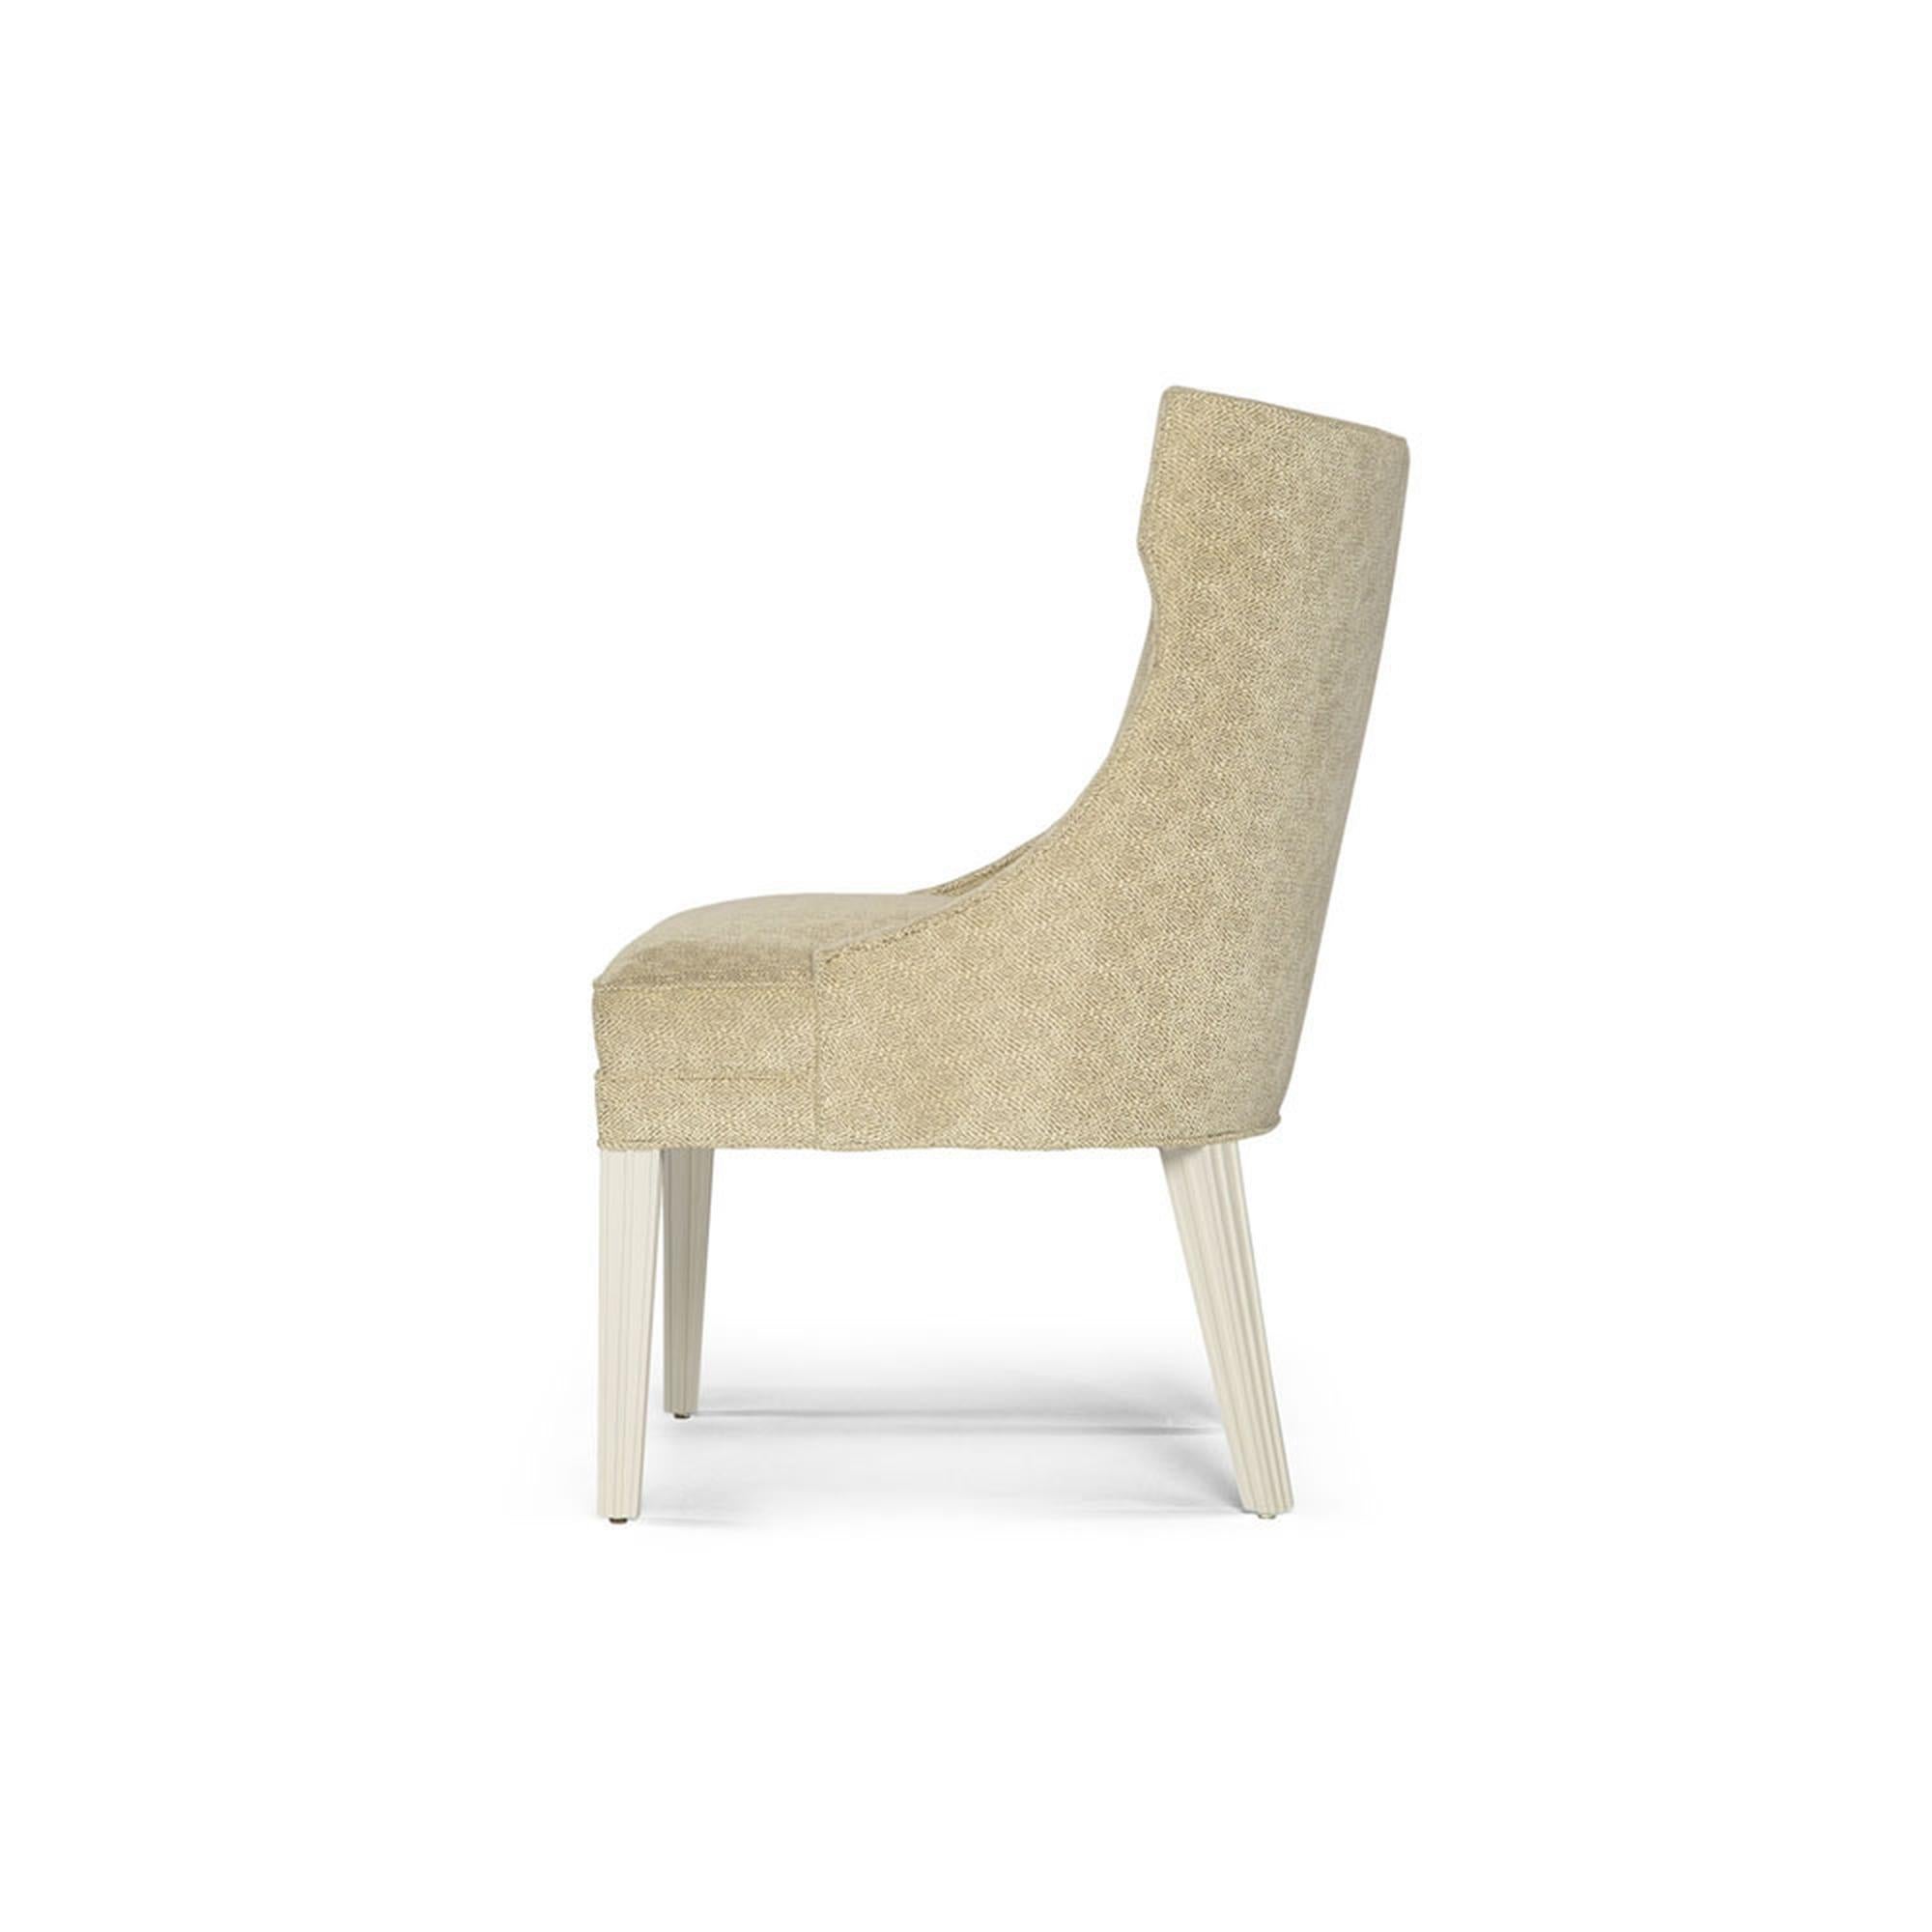 Make a bold statement with this unique Balboa dining chair. Designed with ample space, this chair consists of sloped arms and a rounded back that is elegantly angled to embrace your guest with utmost comfort. Designed to compliment the Balboa dining